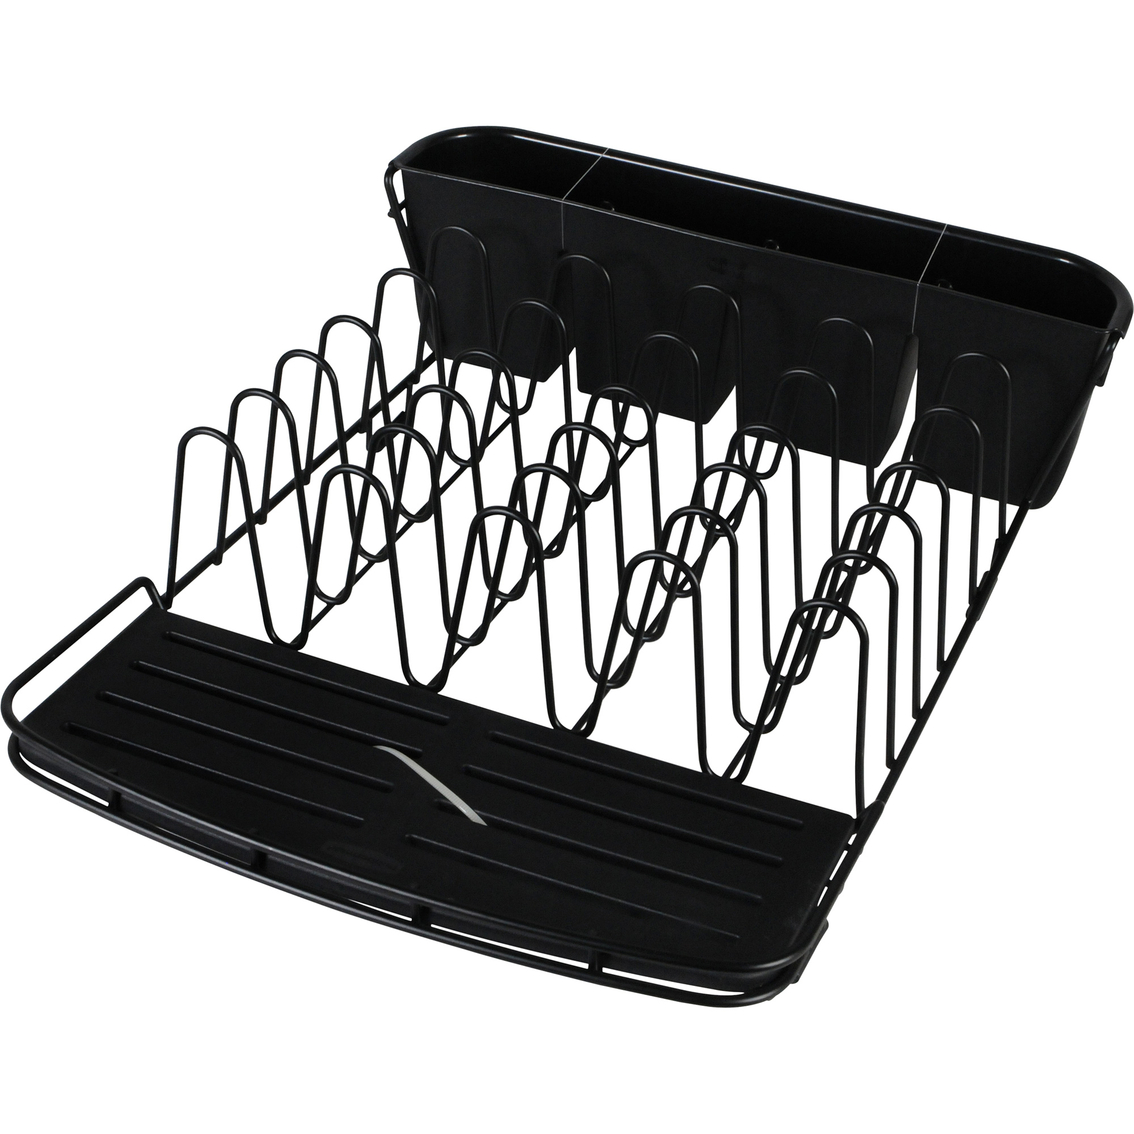 Rubbermaid Deluxe Dish Drainer, Sink Mats & Drains, Household